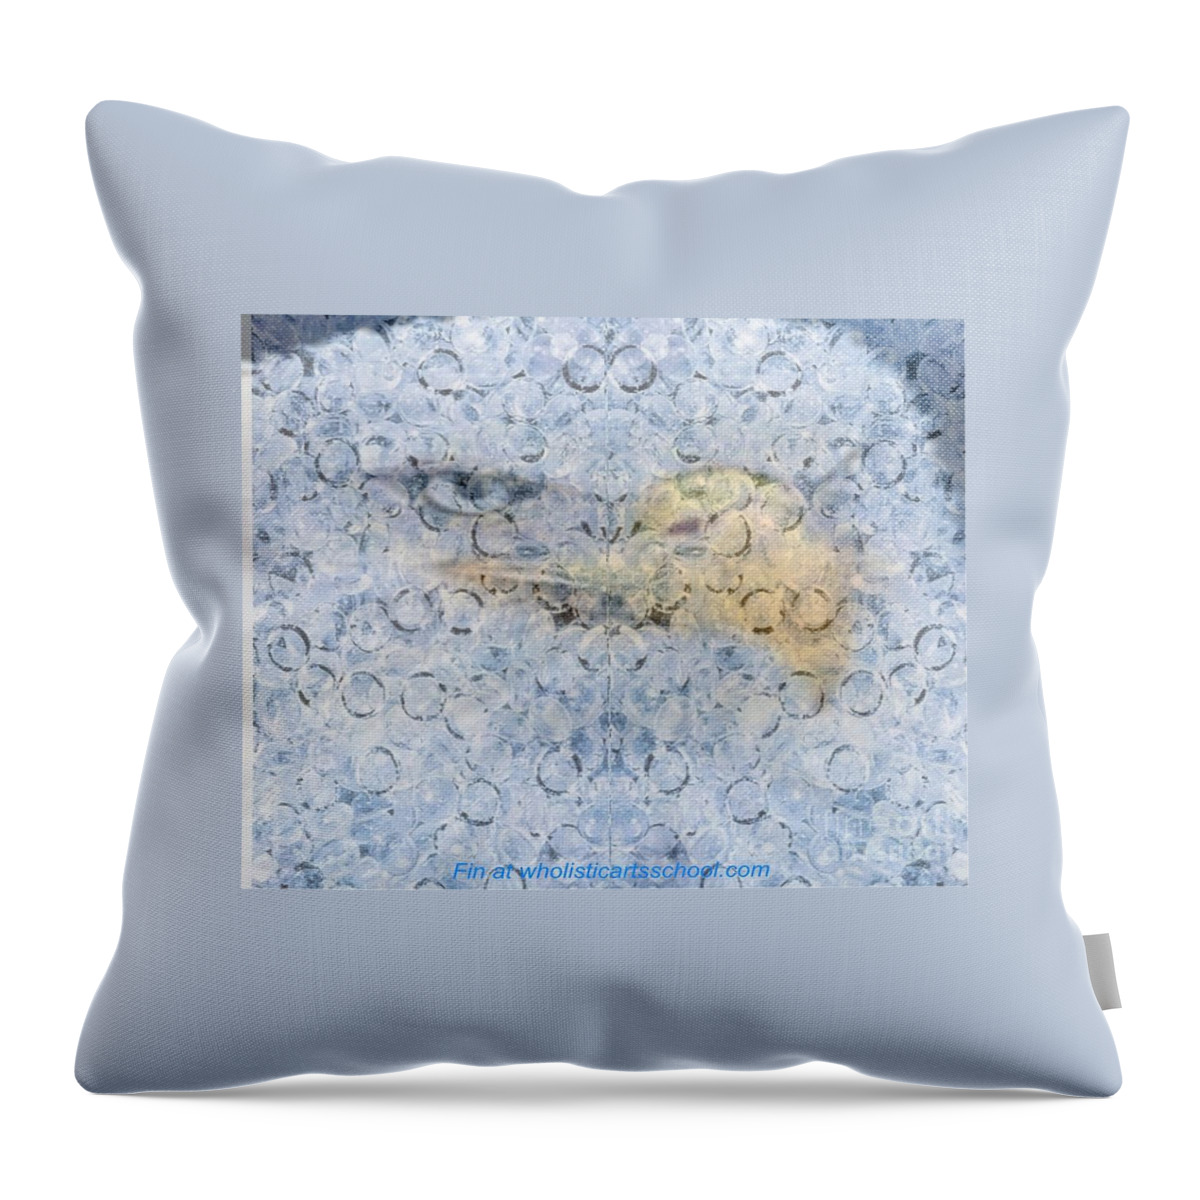 American Eagle Art Throw Pillow featuring the painting American Eagle Art by PainterArtist FIN